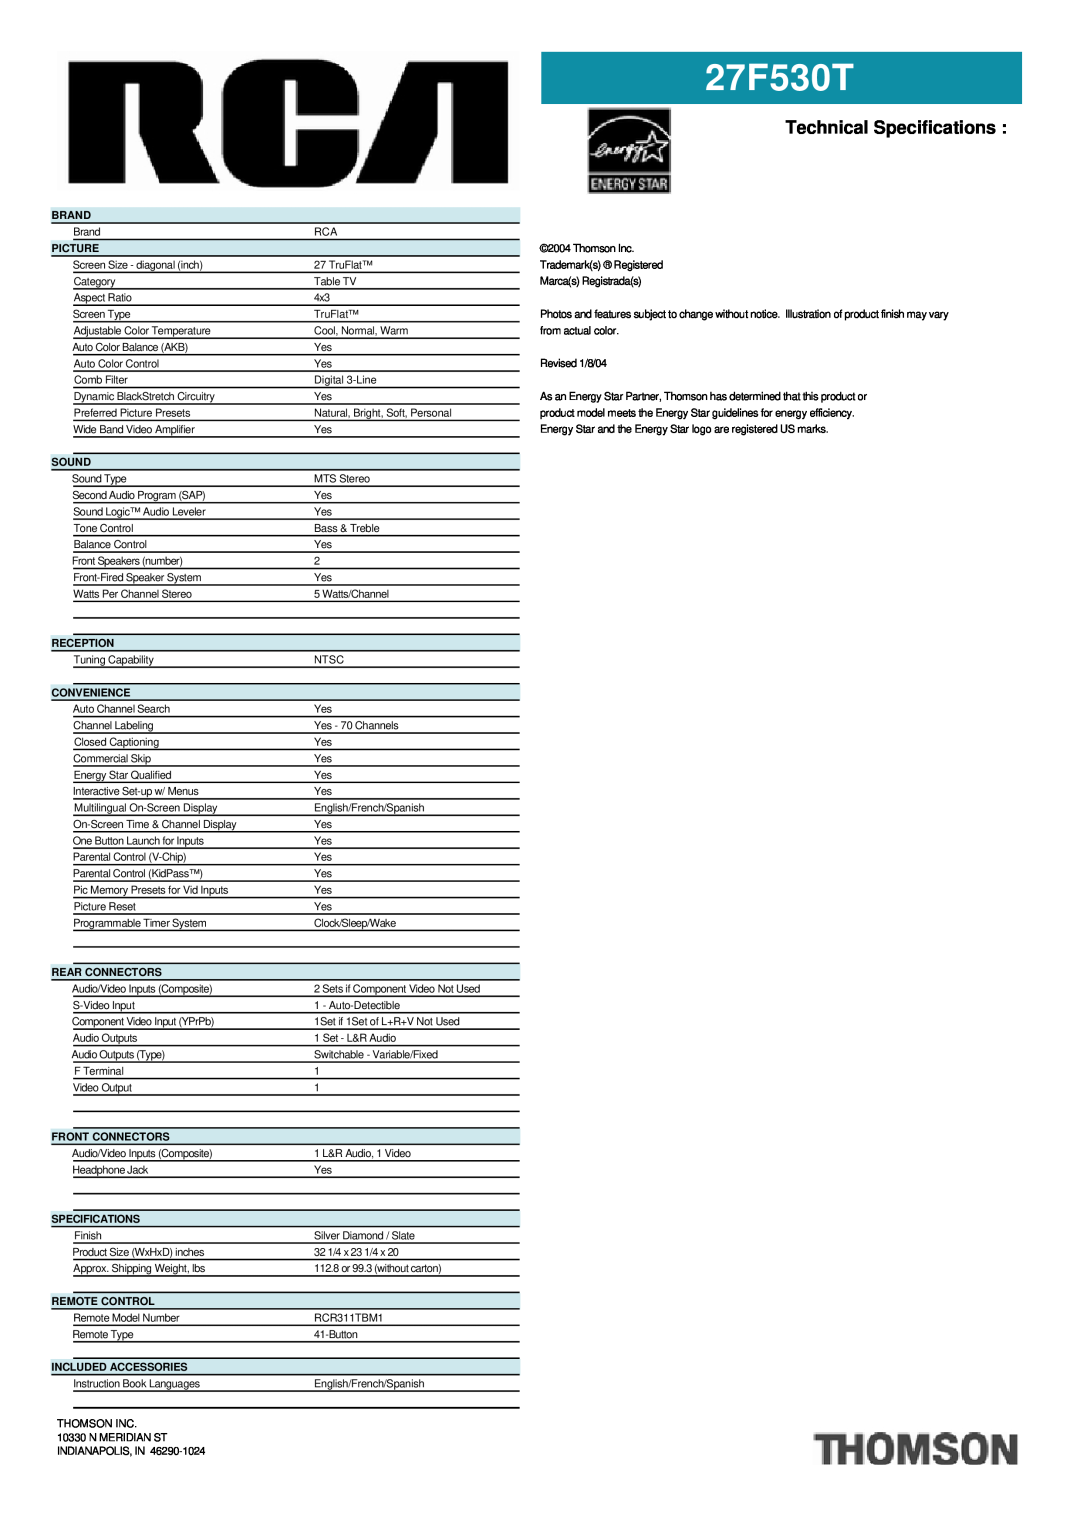 RCA 27F530T manual Technical Specifications 